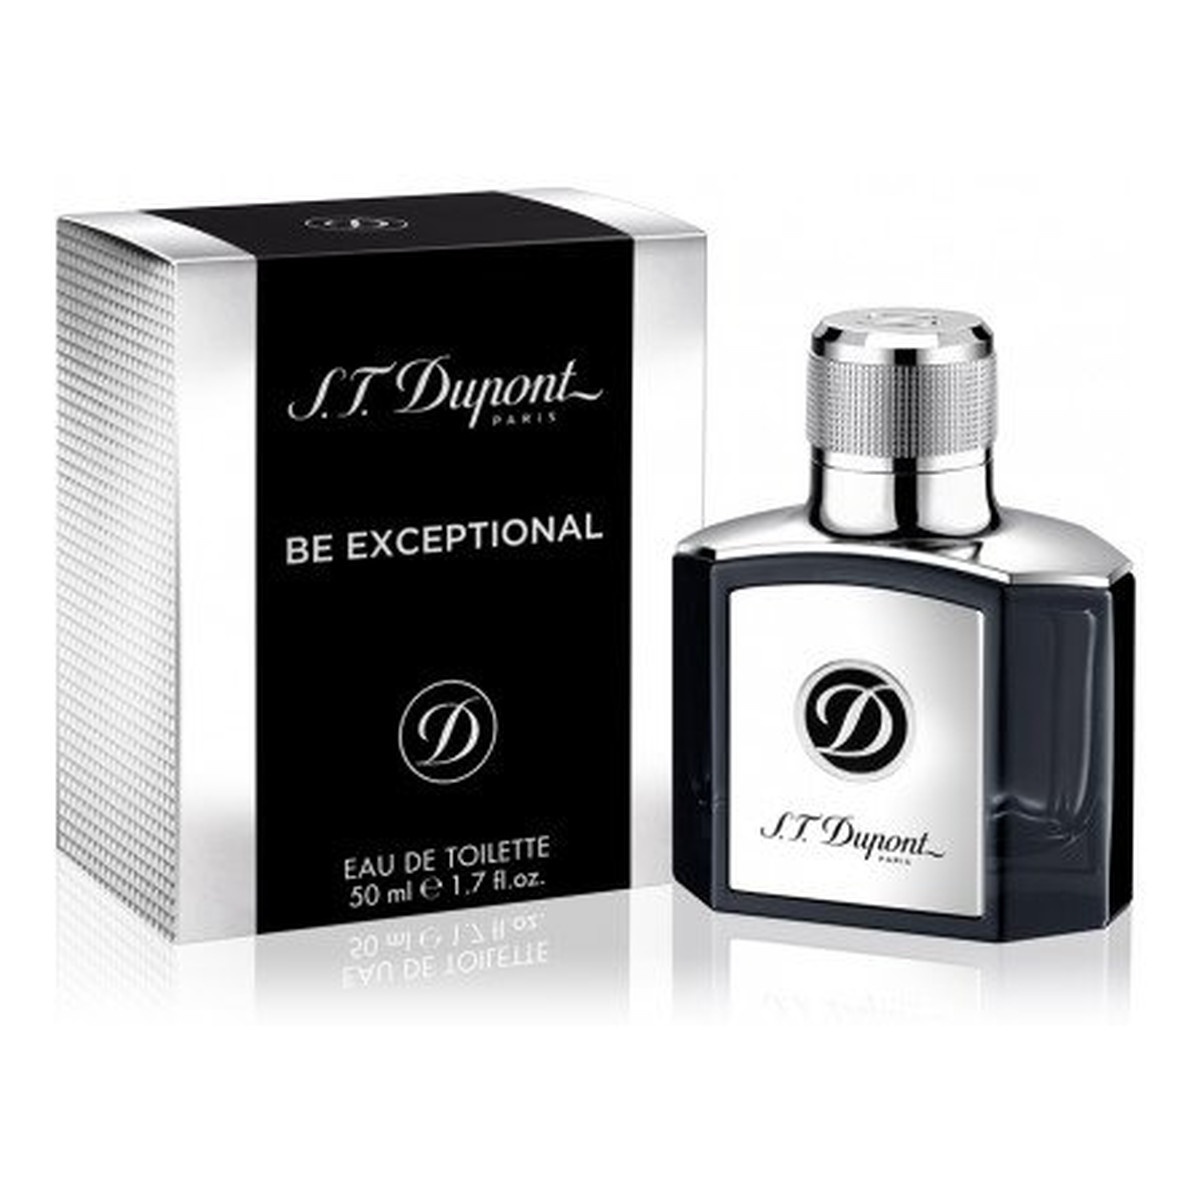 S. T. Dupont Be Exceptional woda toaletowa 50ml